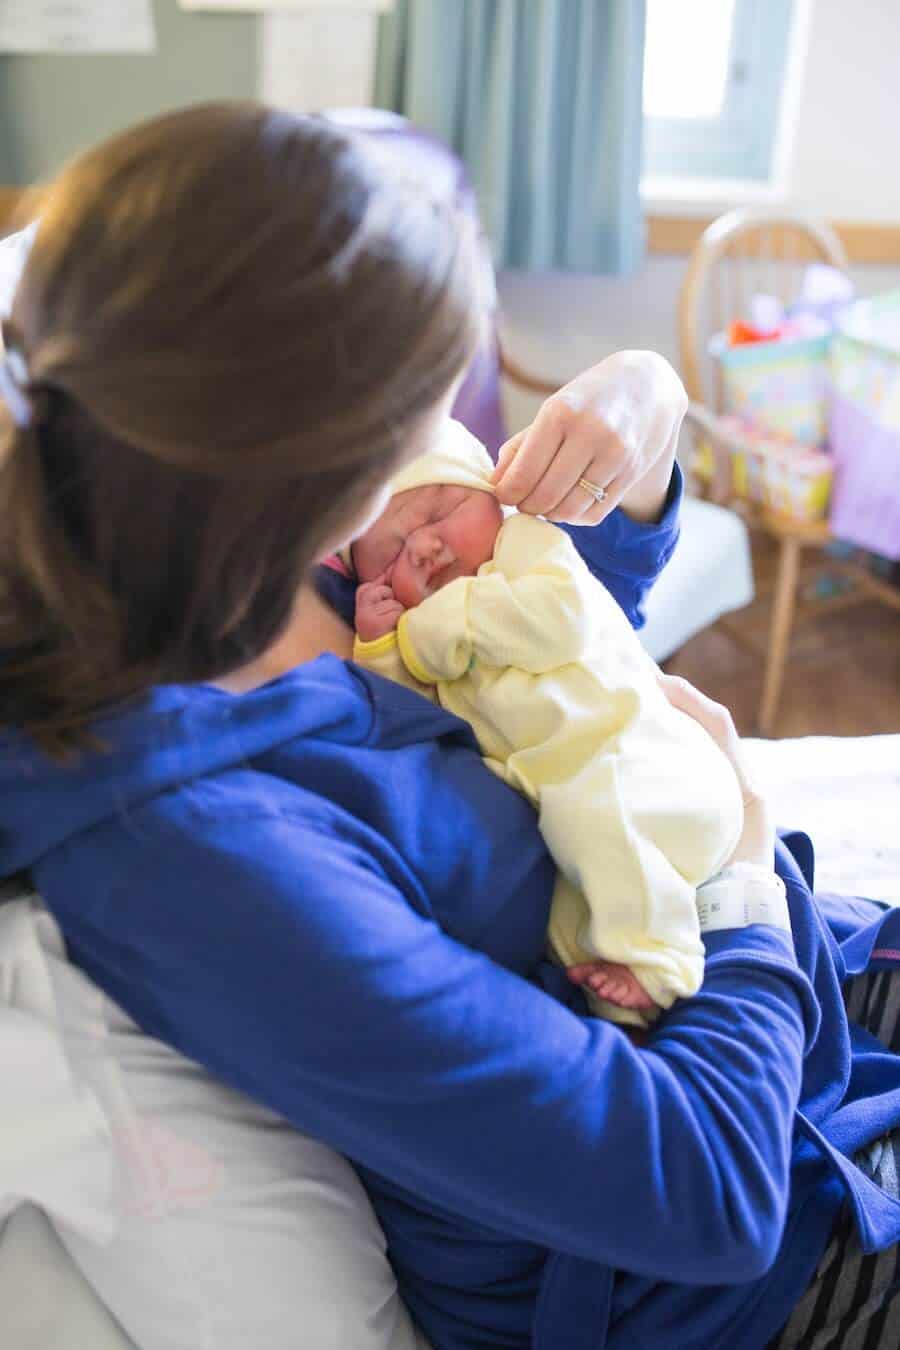 First time mom holds newborn wearing yellow outfit.